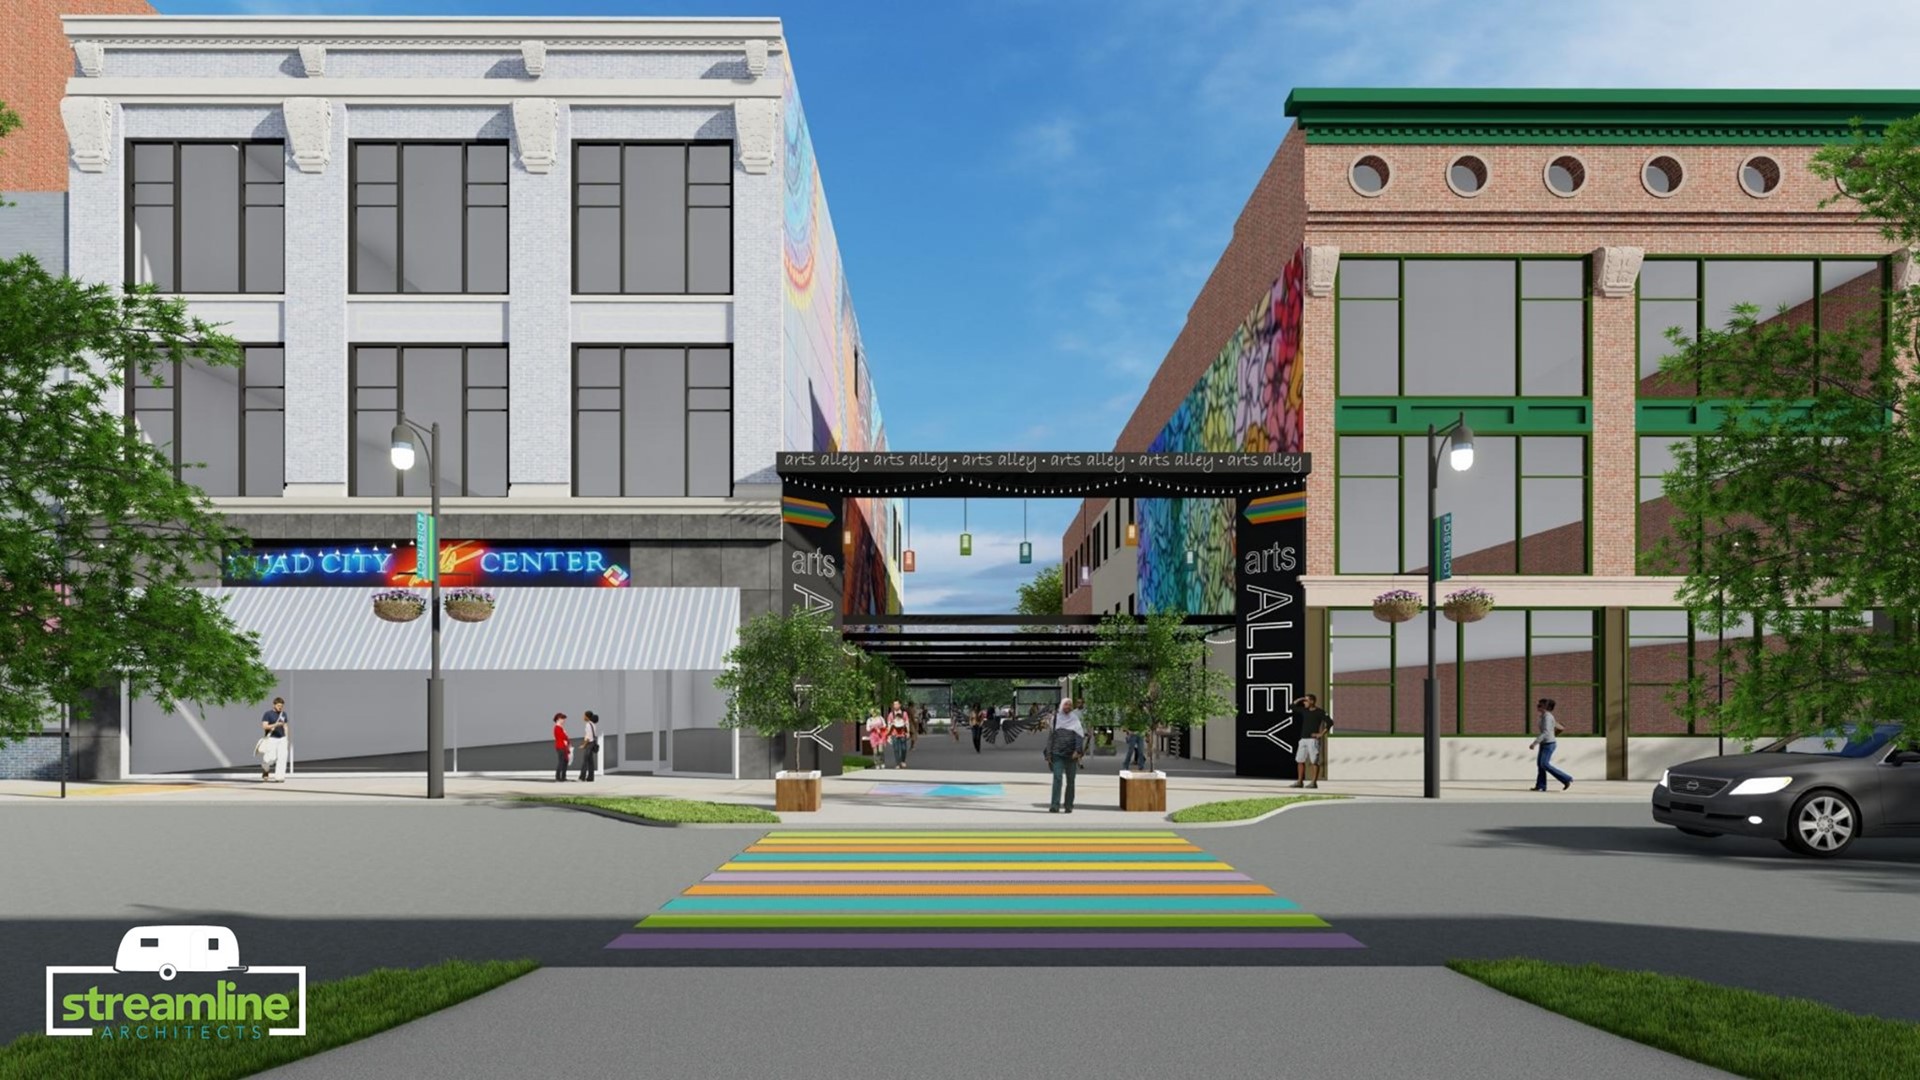 There are plans in the works to update the Great River Plaza and create Arts Alley